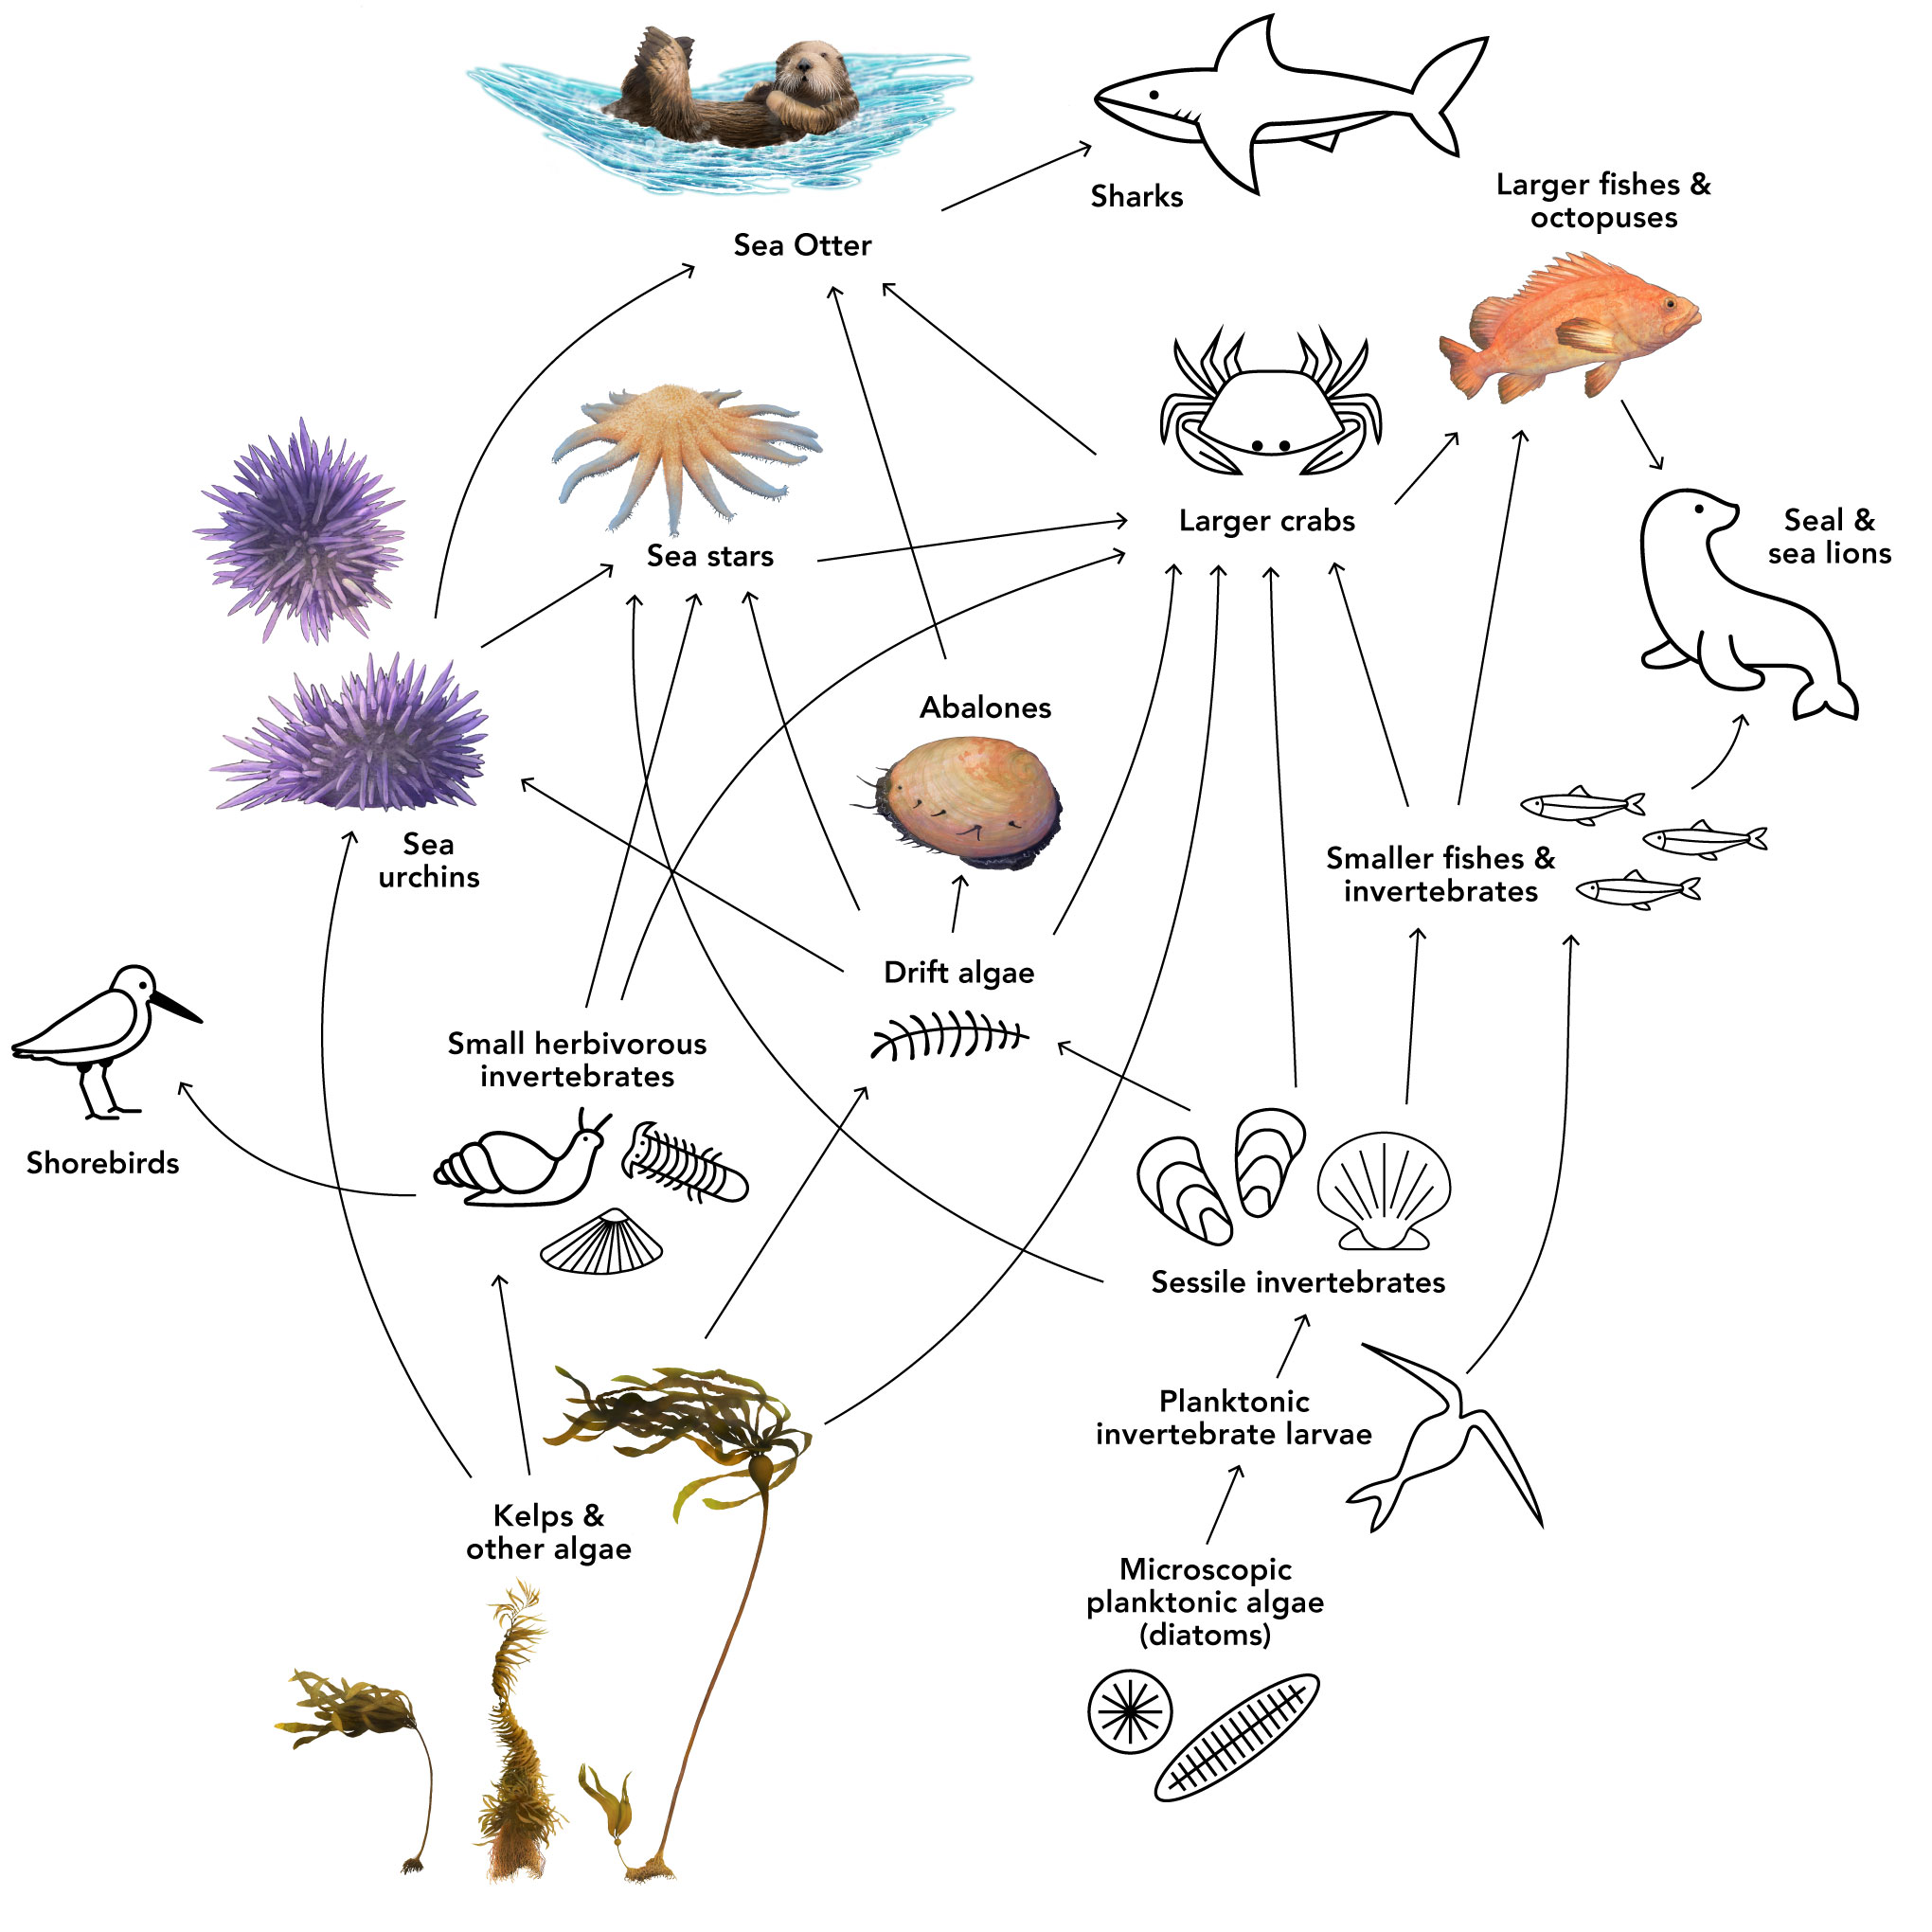 Diagram showing the food web